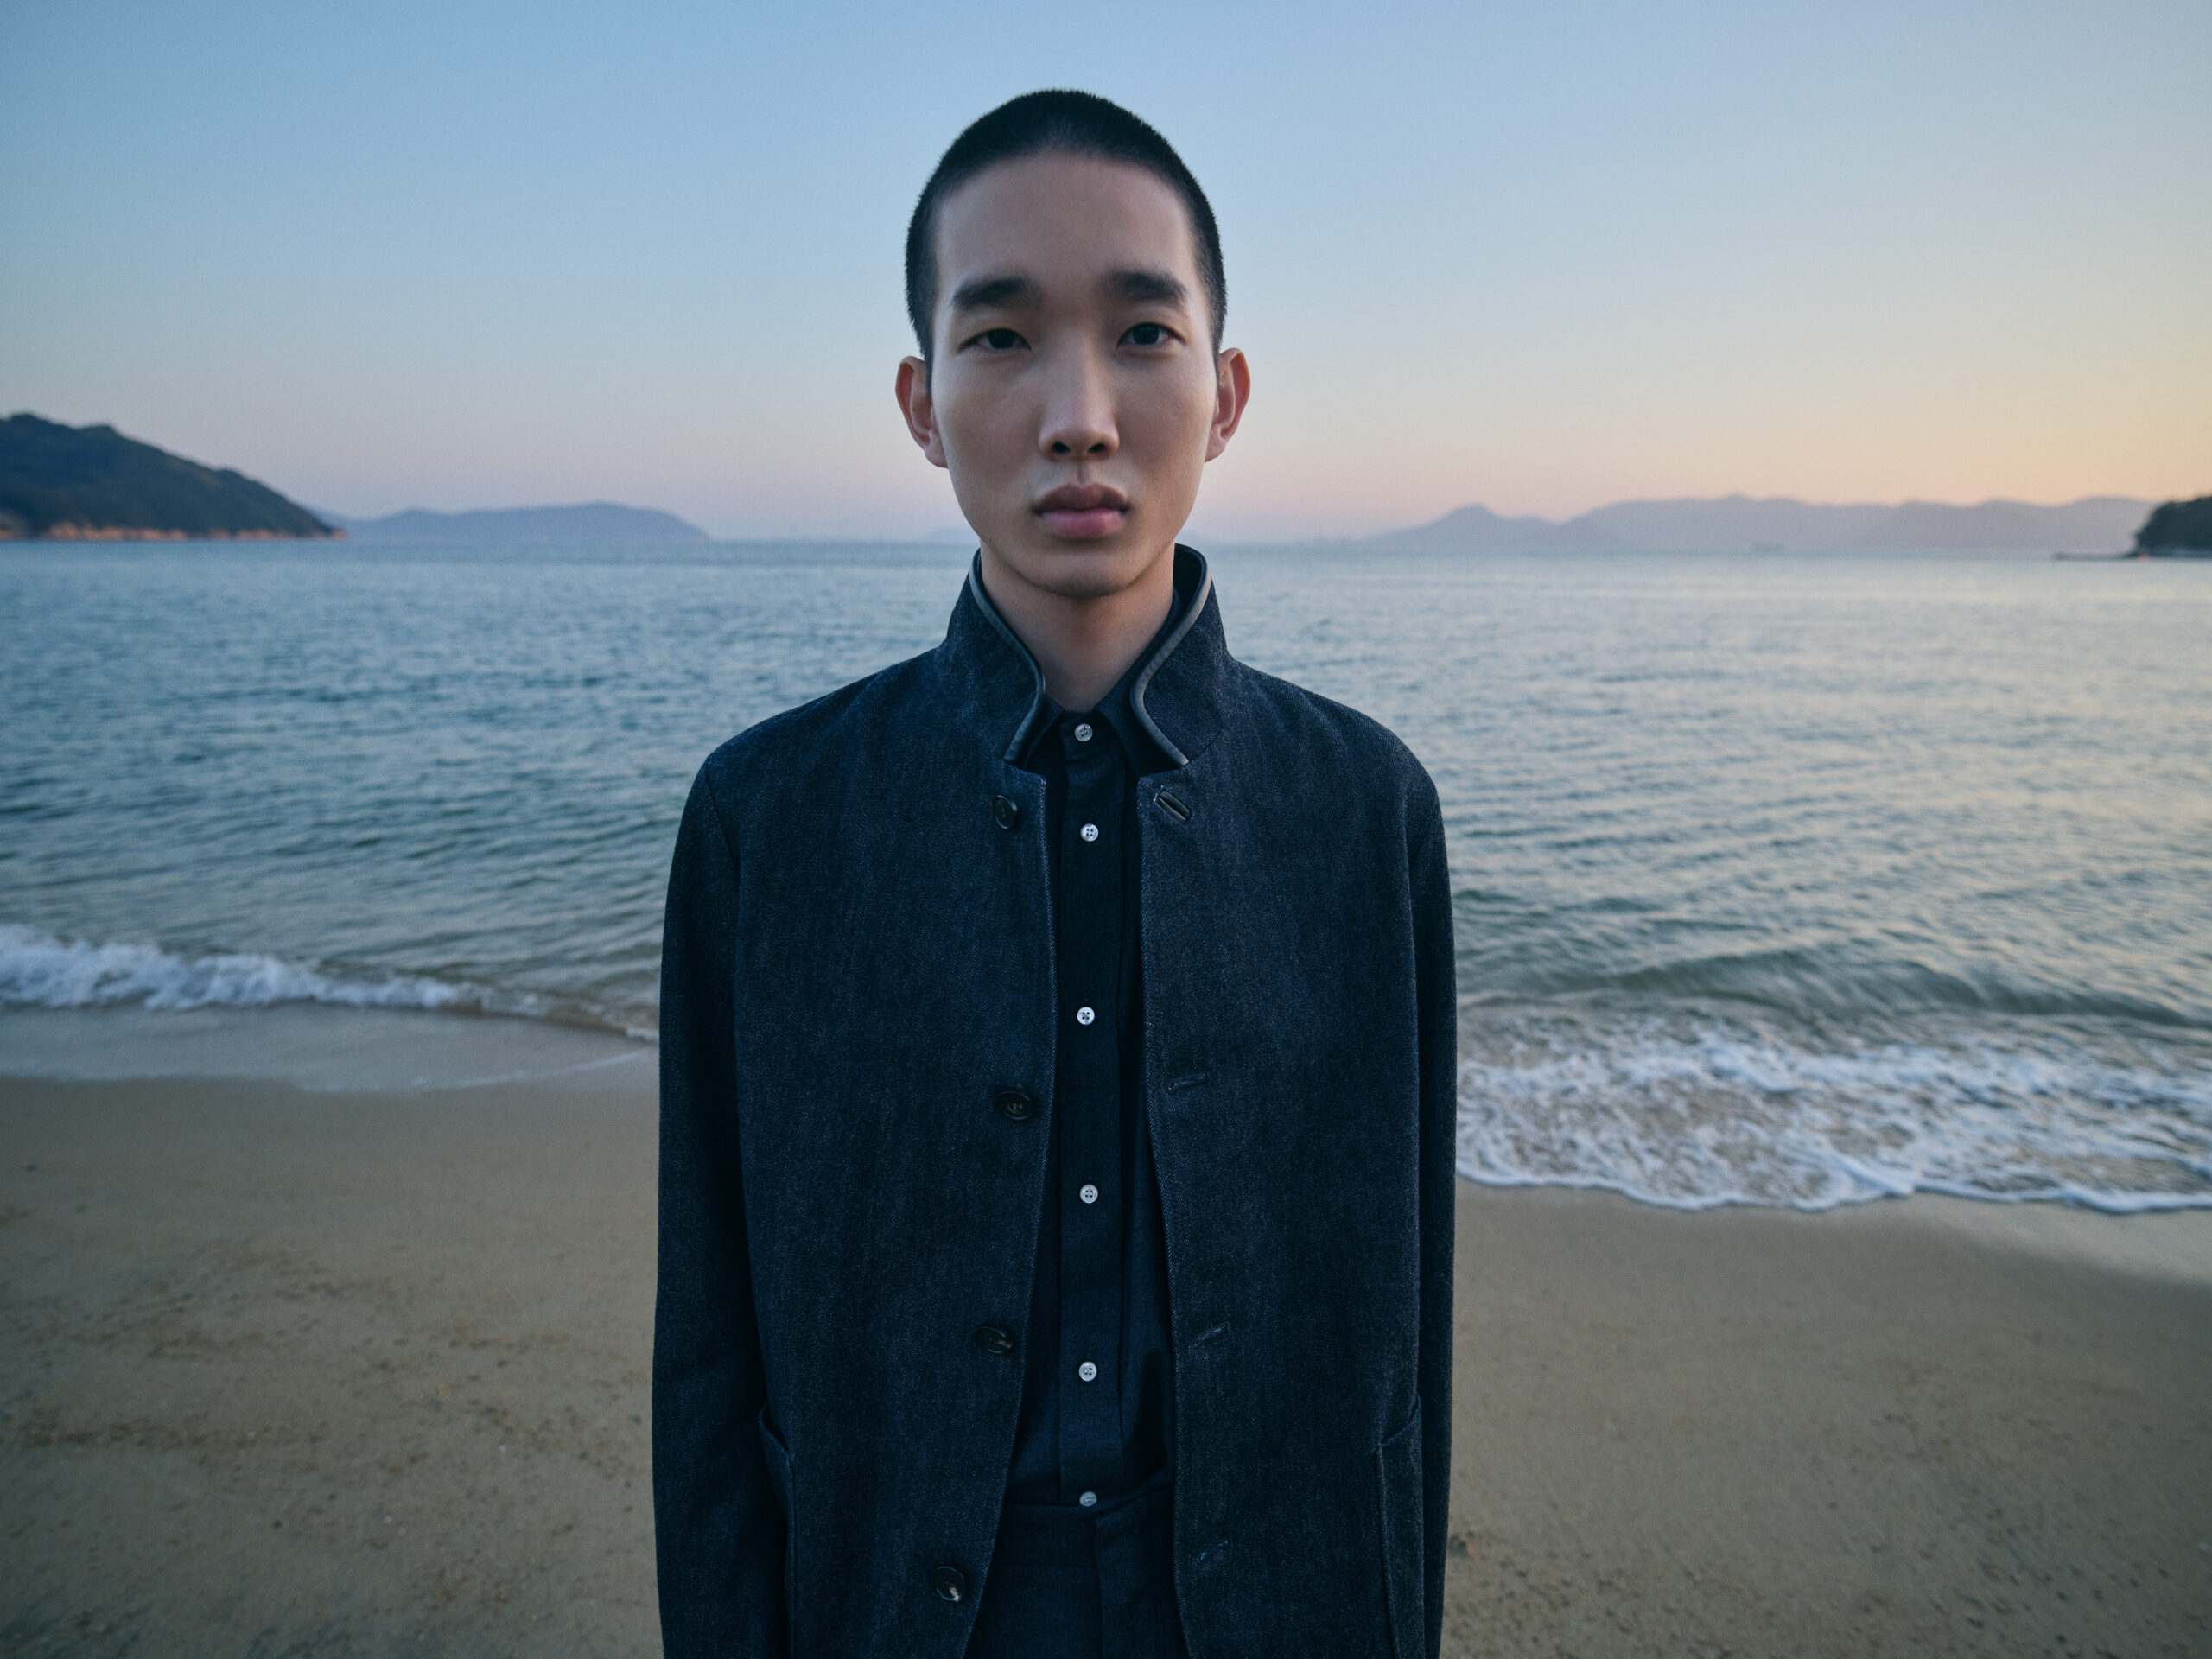 A man stands on a sandy beach at dusk, with gentle waves lapping at the shore and distant mountains under a soft sky. He is wearing the Loro Piana Spagna Jacket, a symbol of relaxed luxury with a distinctive standing collar, spacious patch pockets, and elegant horn buttons.